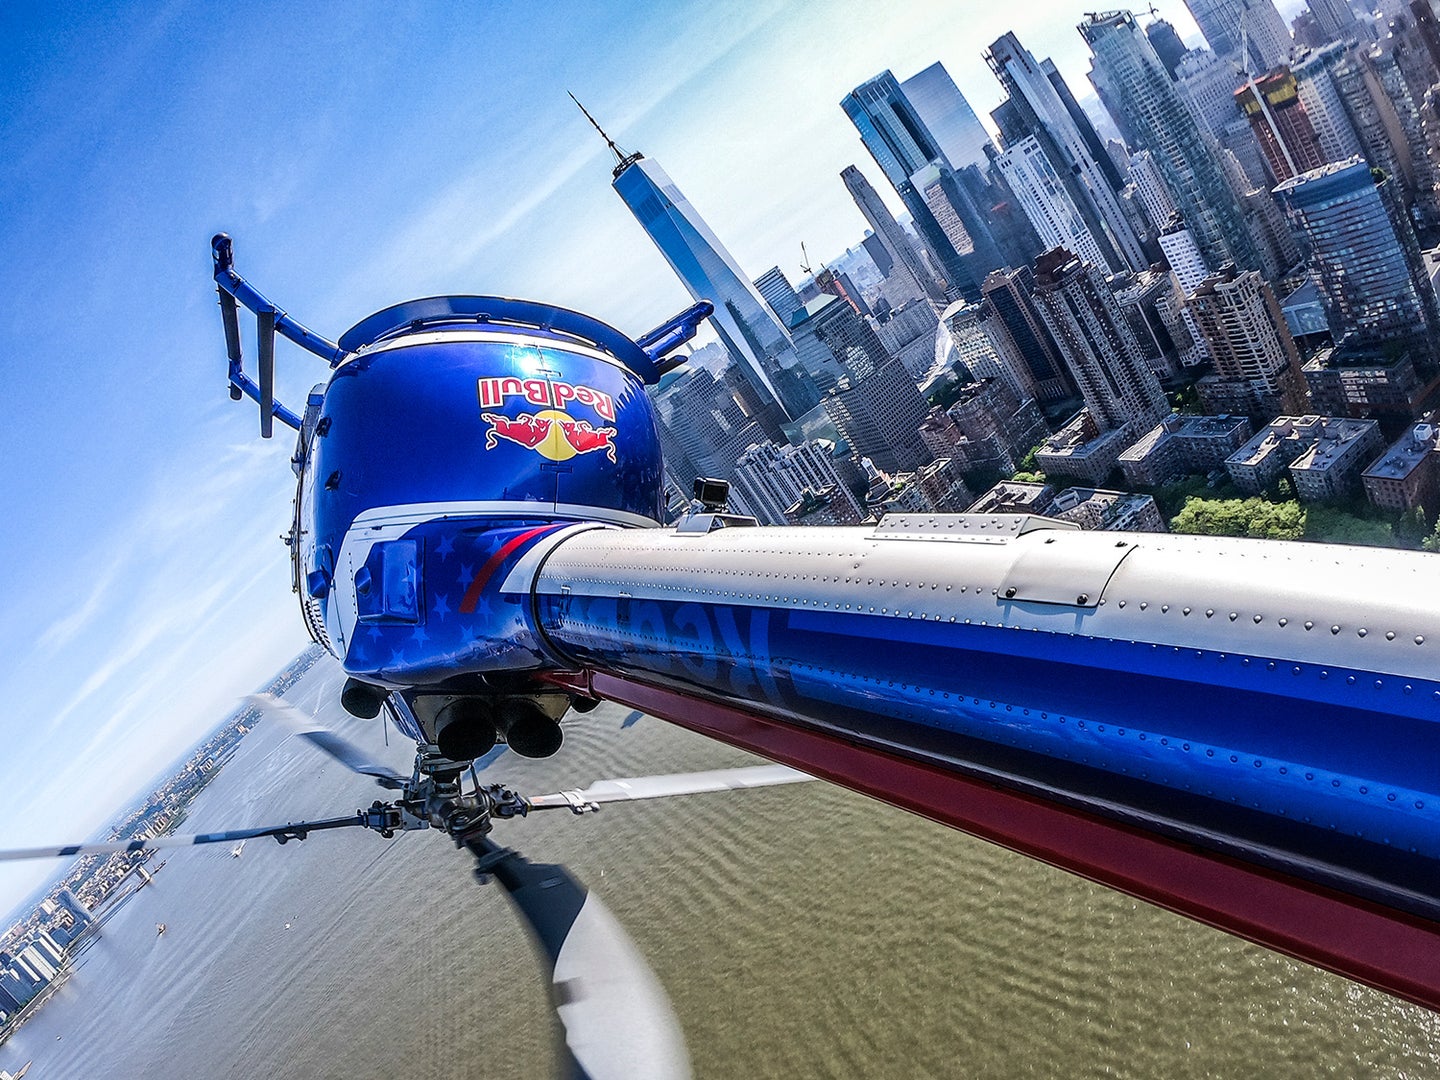 POV shot of red bull helicopter in the midst of one of its aerial maneuvers